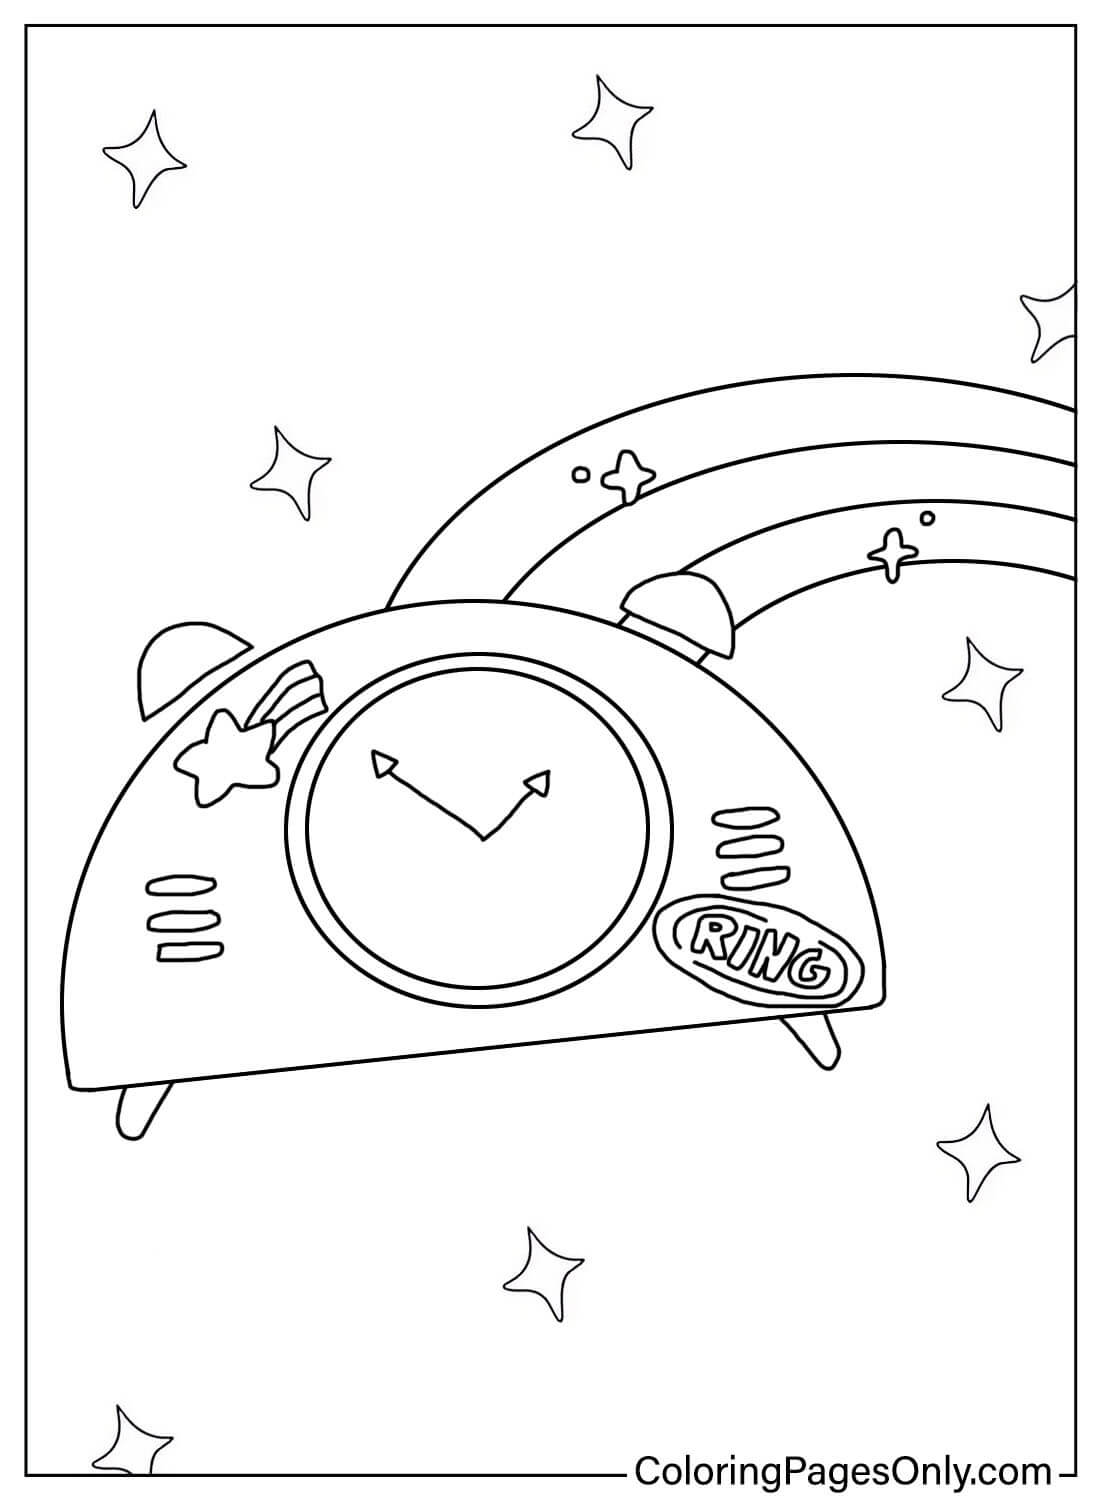 Cute Alarm Clock Coloring Page from